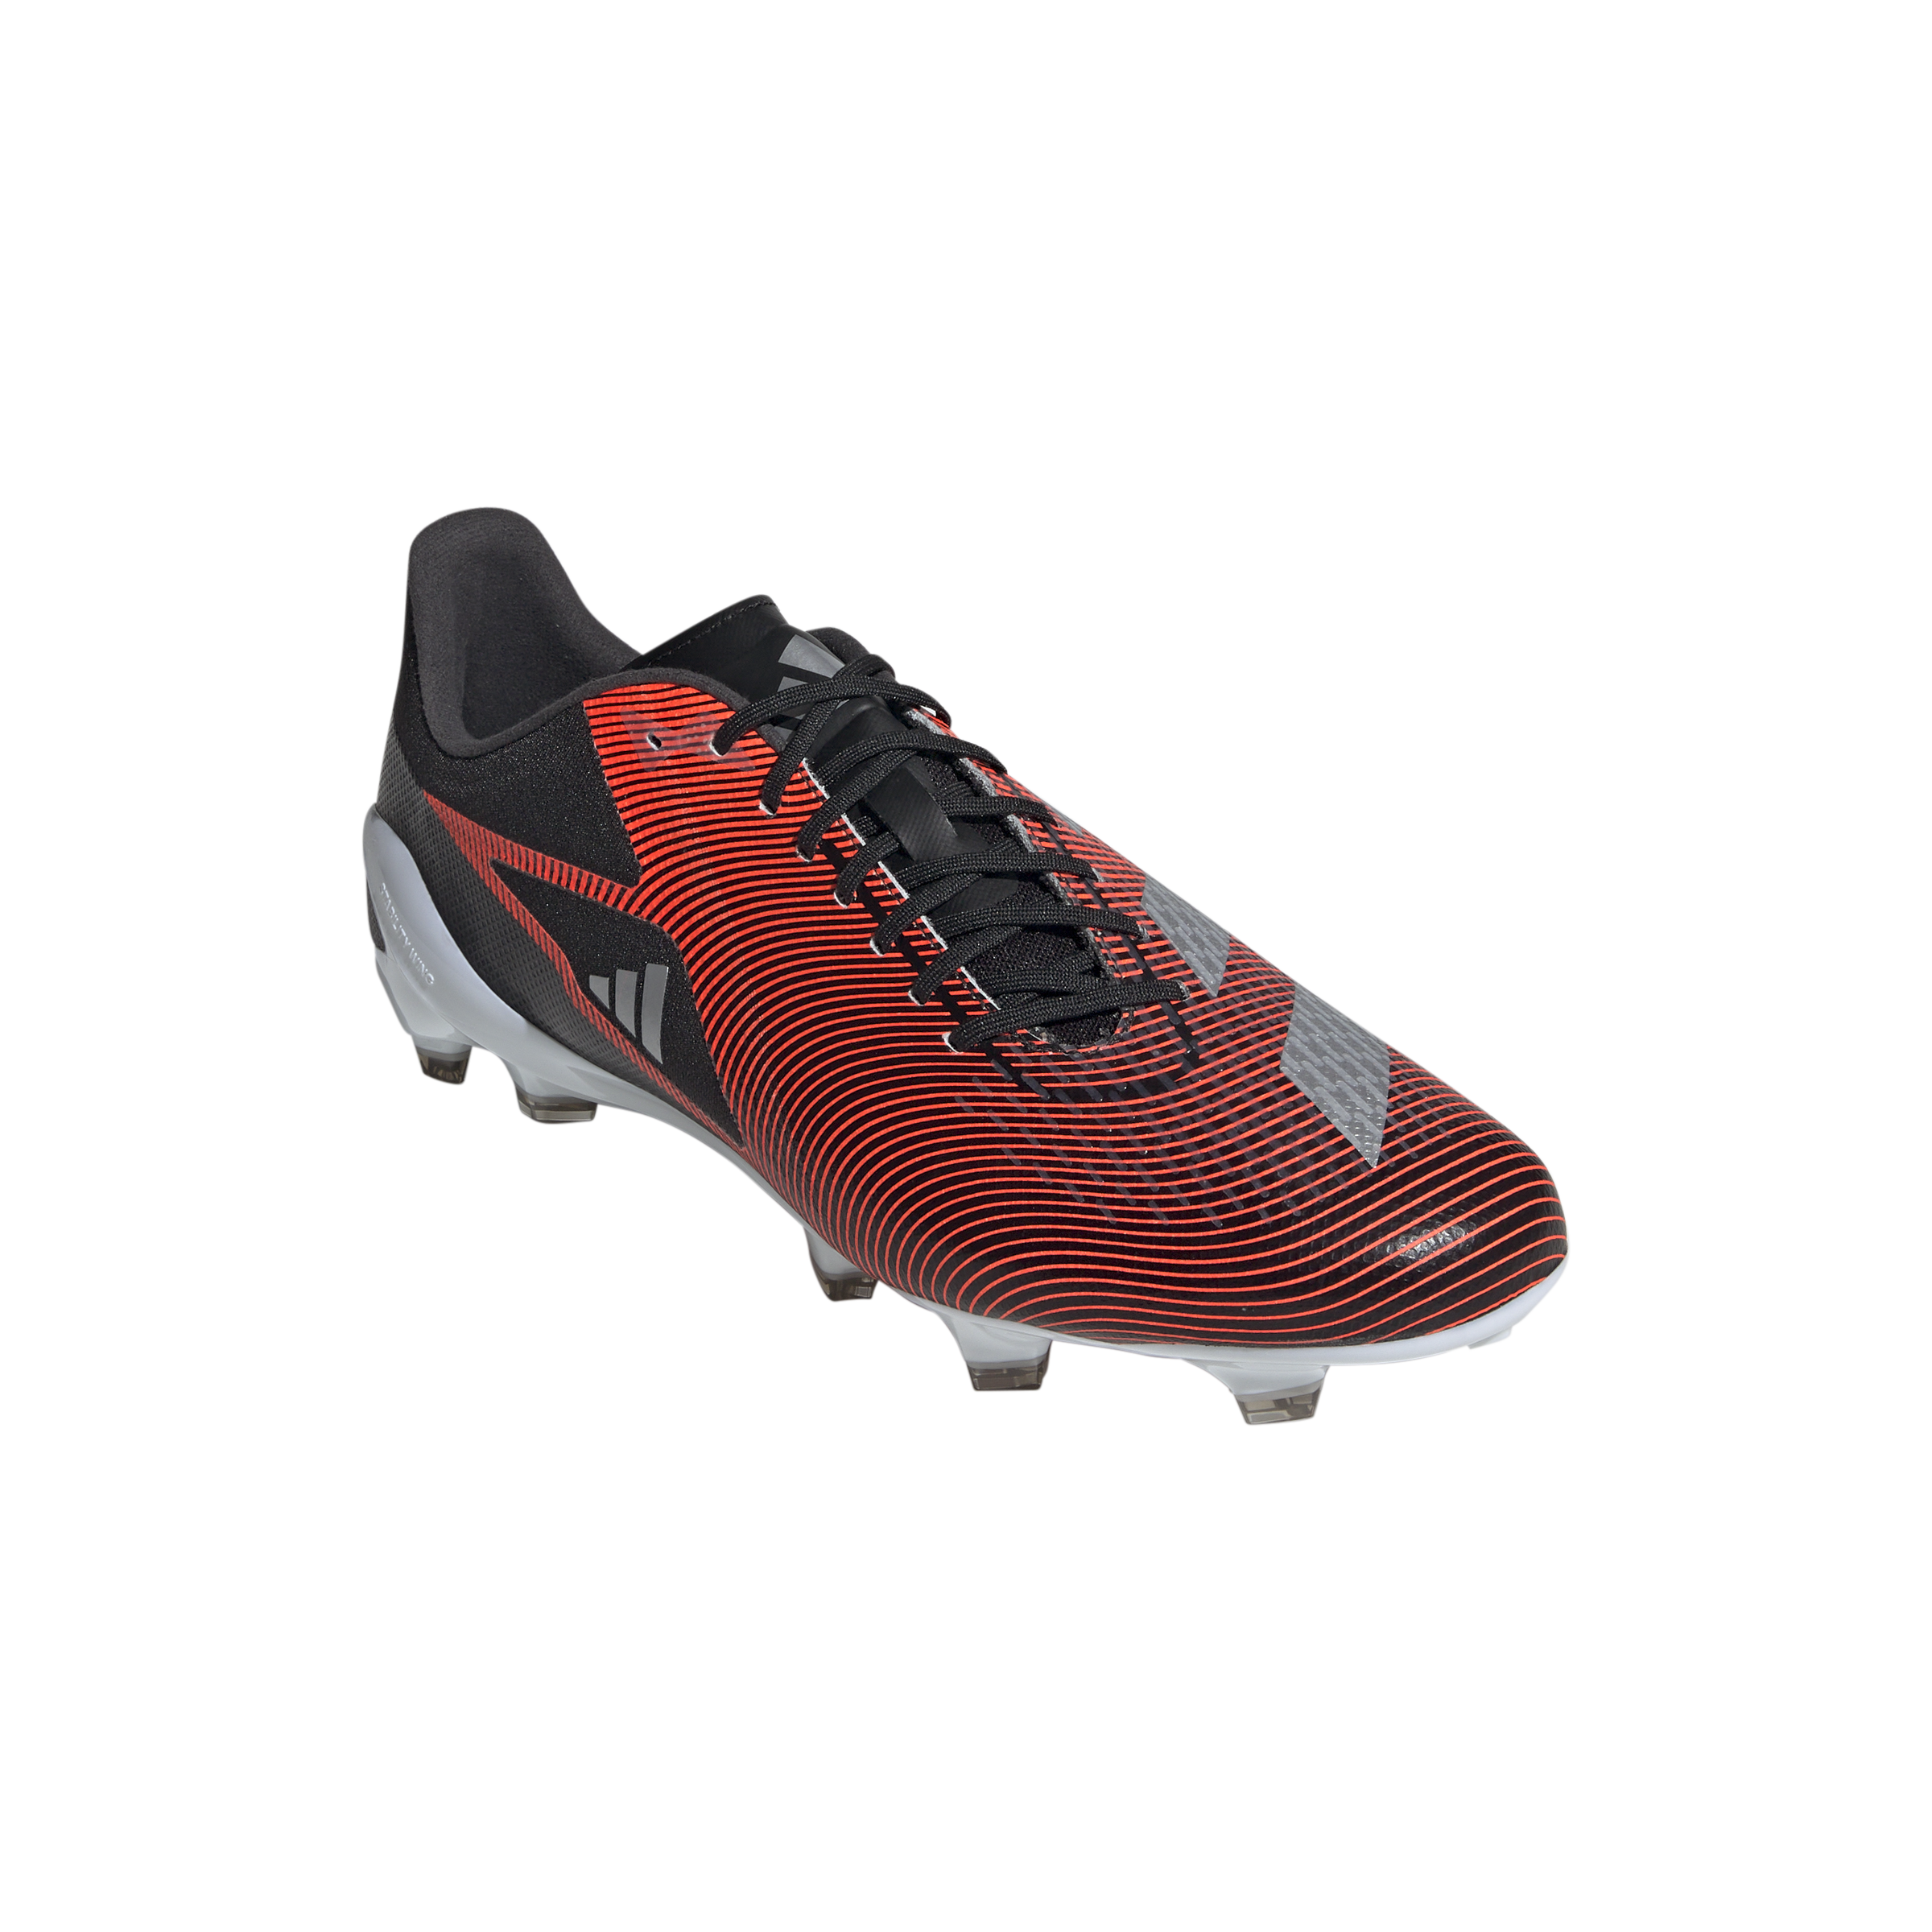 Mens RS 15 Pro Firm Ground Rugby Boot